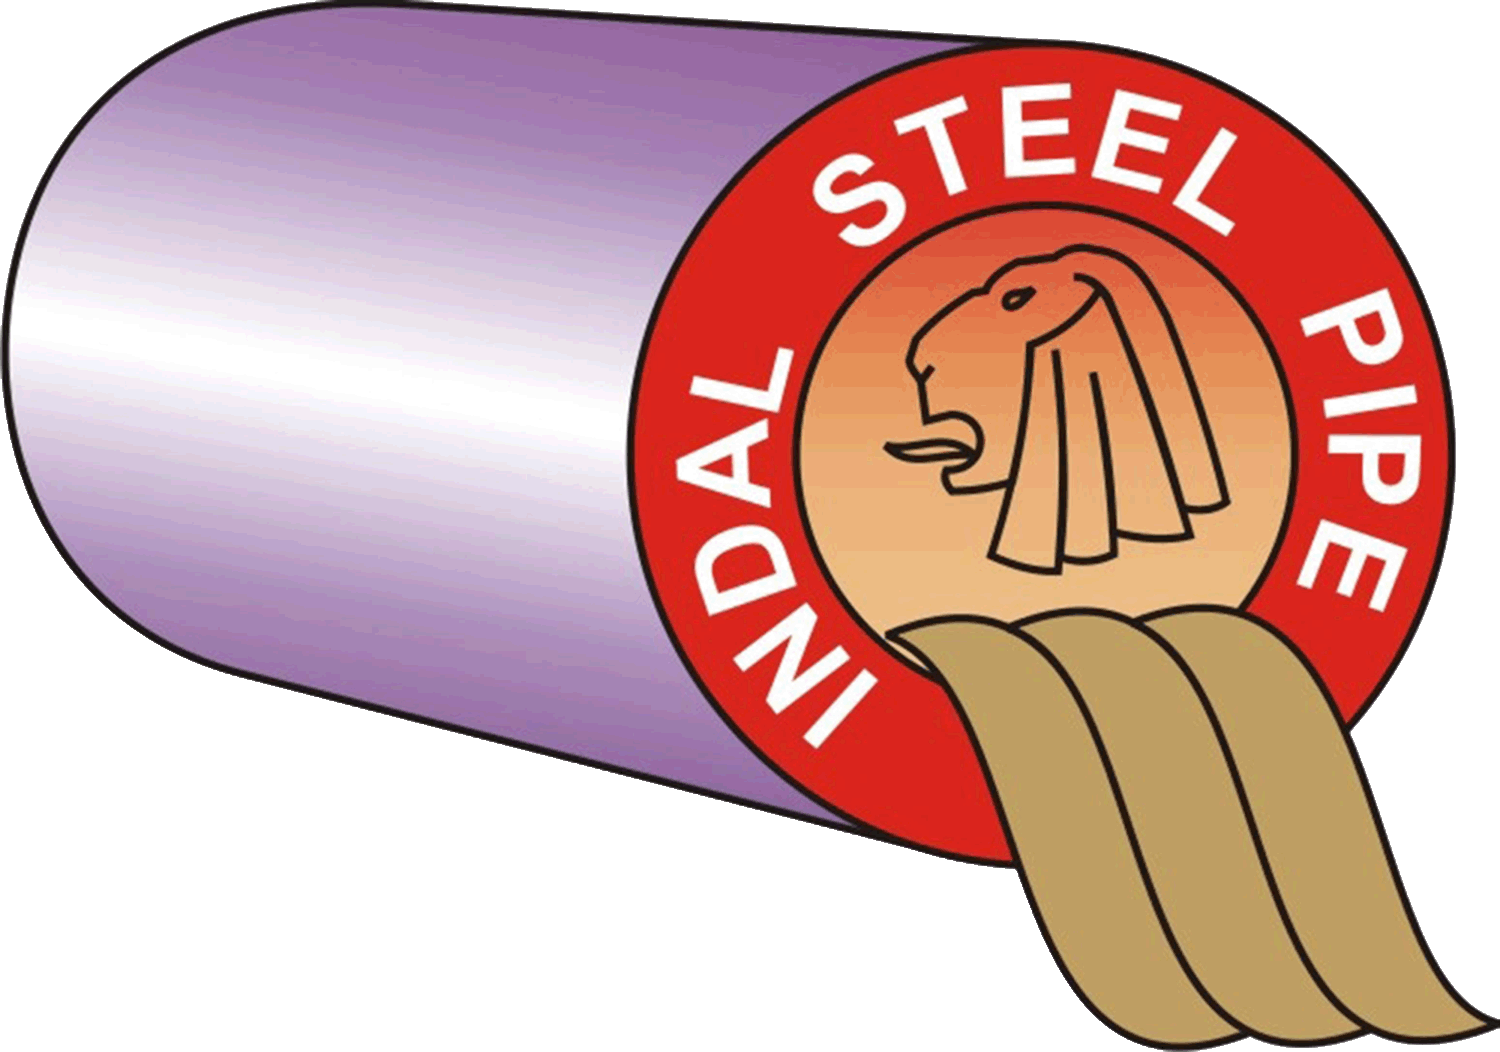 www.indalsteelpipe.co.id